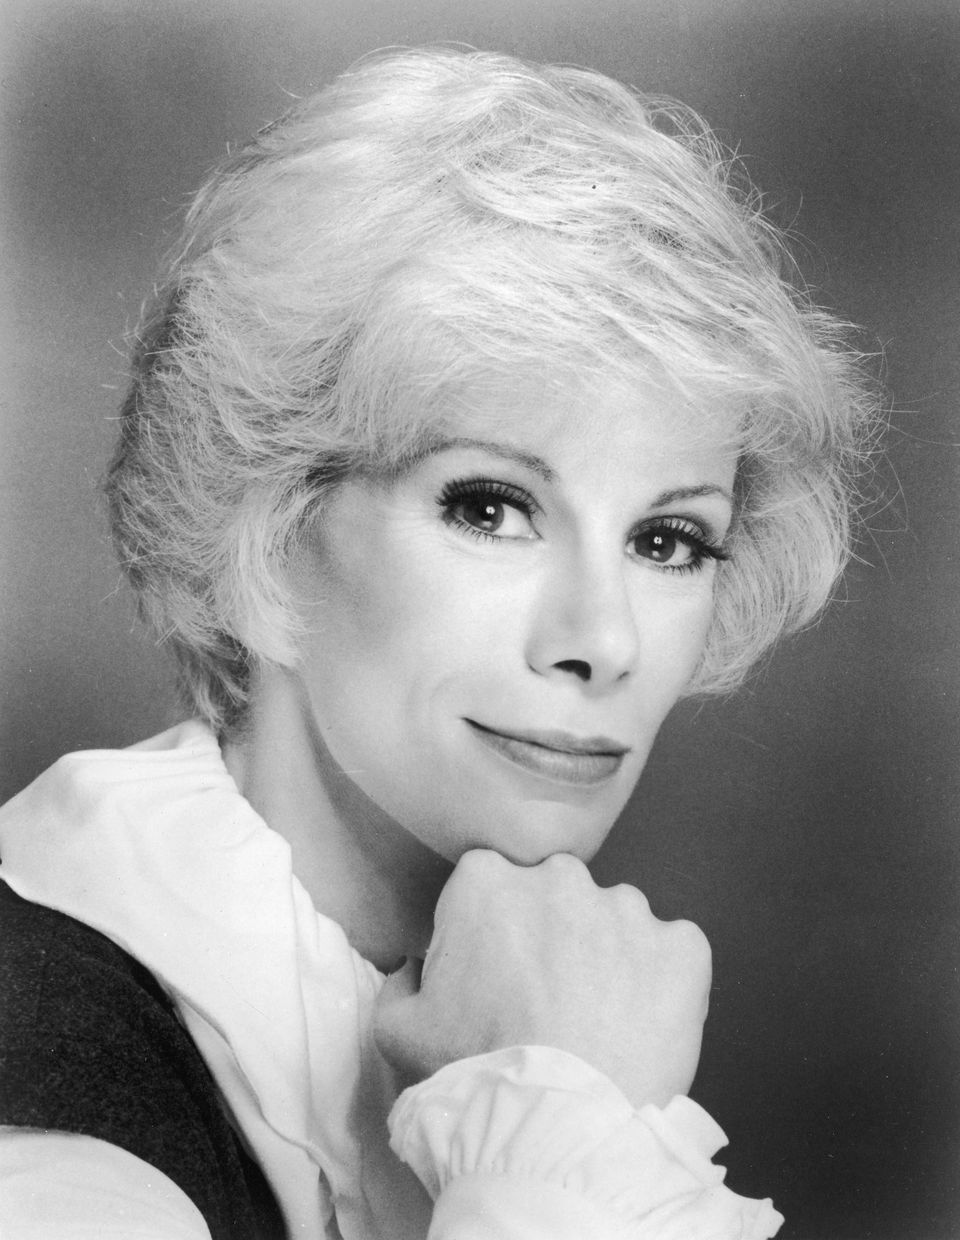 "<a href="http://www.theguardian.com/stage/2012/aug/09/comedy-gold-joan-rivers" role="link" class=" js-entry-link cet-external-link" data-vars-item-name="I hate thin people" data-vars-item-type="text" data-vars-unit-name="5bad40f8e4b04234e8587b1e" data-vars-unit-type="buzz_body" data-vars-target-content-id="http://www.theguardian.com/stage/2012/aug/09/comedy-gold-joan-rivers" data-vars-target-content-type="url" data-vars-type="web_external_link" data-vars-subunit-name="before_you_go_slideshow" data-vars-subunit-type="component" data-vars-position-in-subunit="9">I hate thin people</a>; 'Oh, does the tampon make me look fat?'"